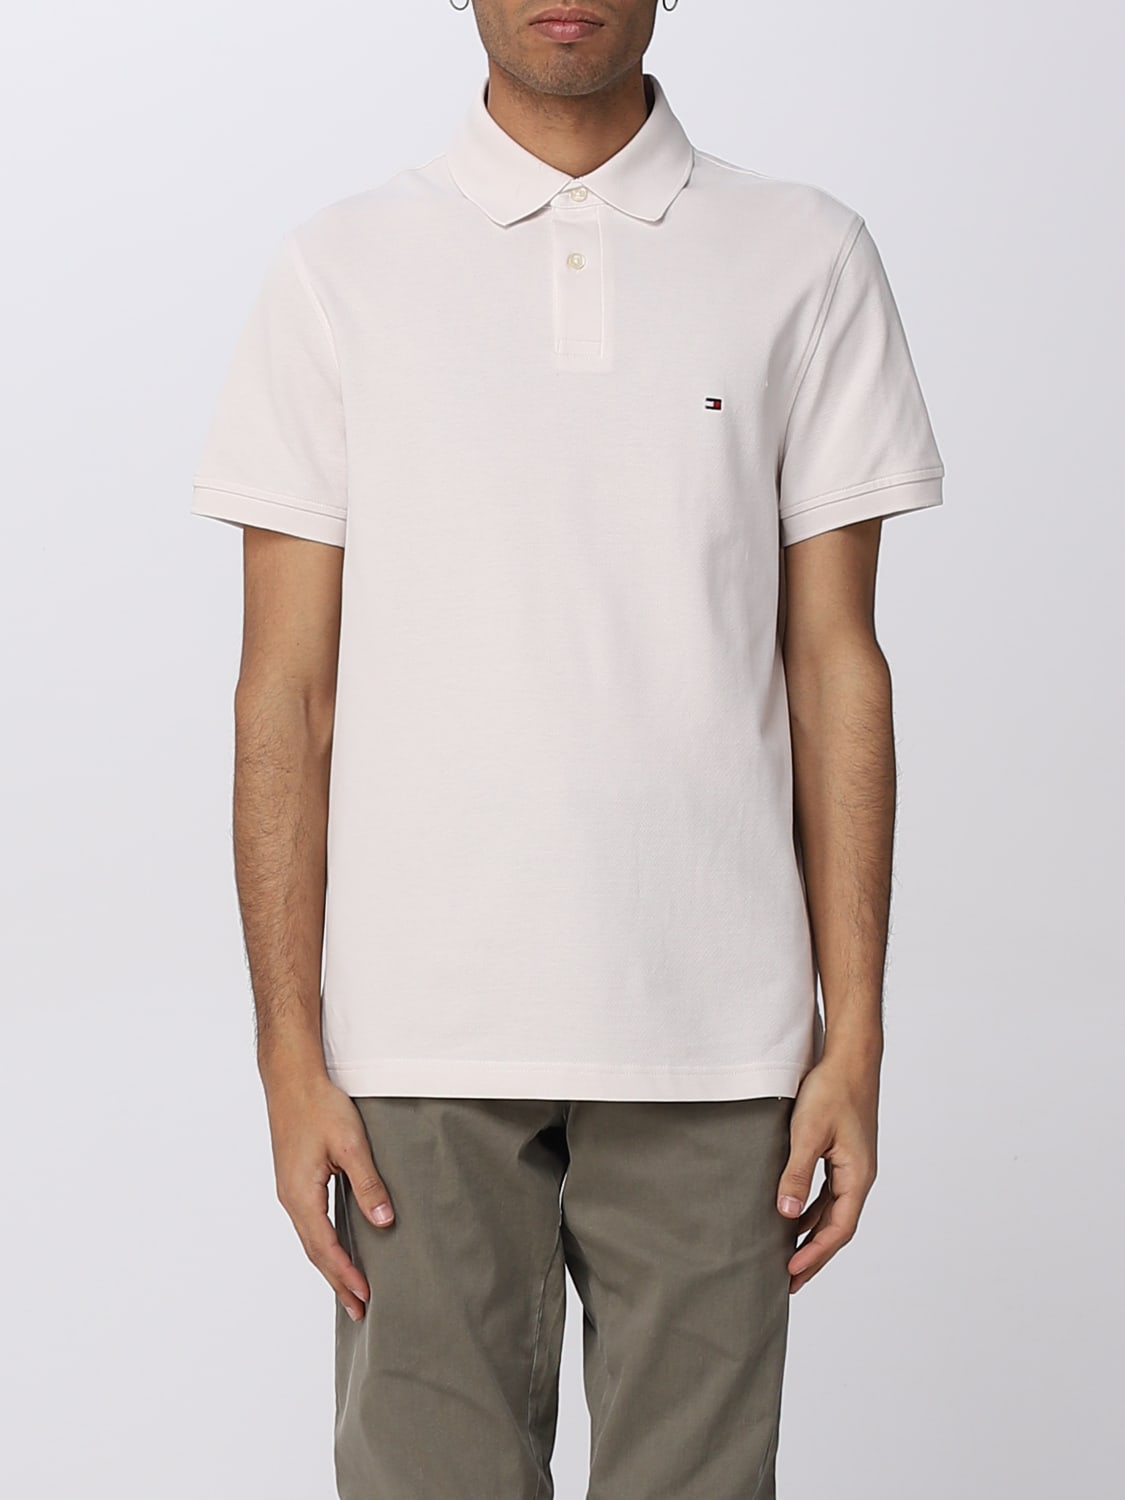 Tommy Outlet: polo shirt for White | Tommy Hilfiger polo shirt MW0MW17770 online at GIGLIO.COM